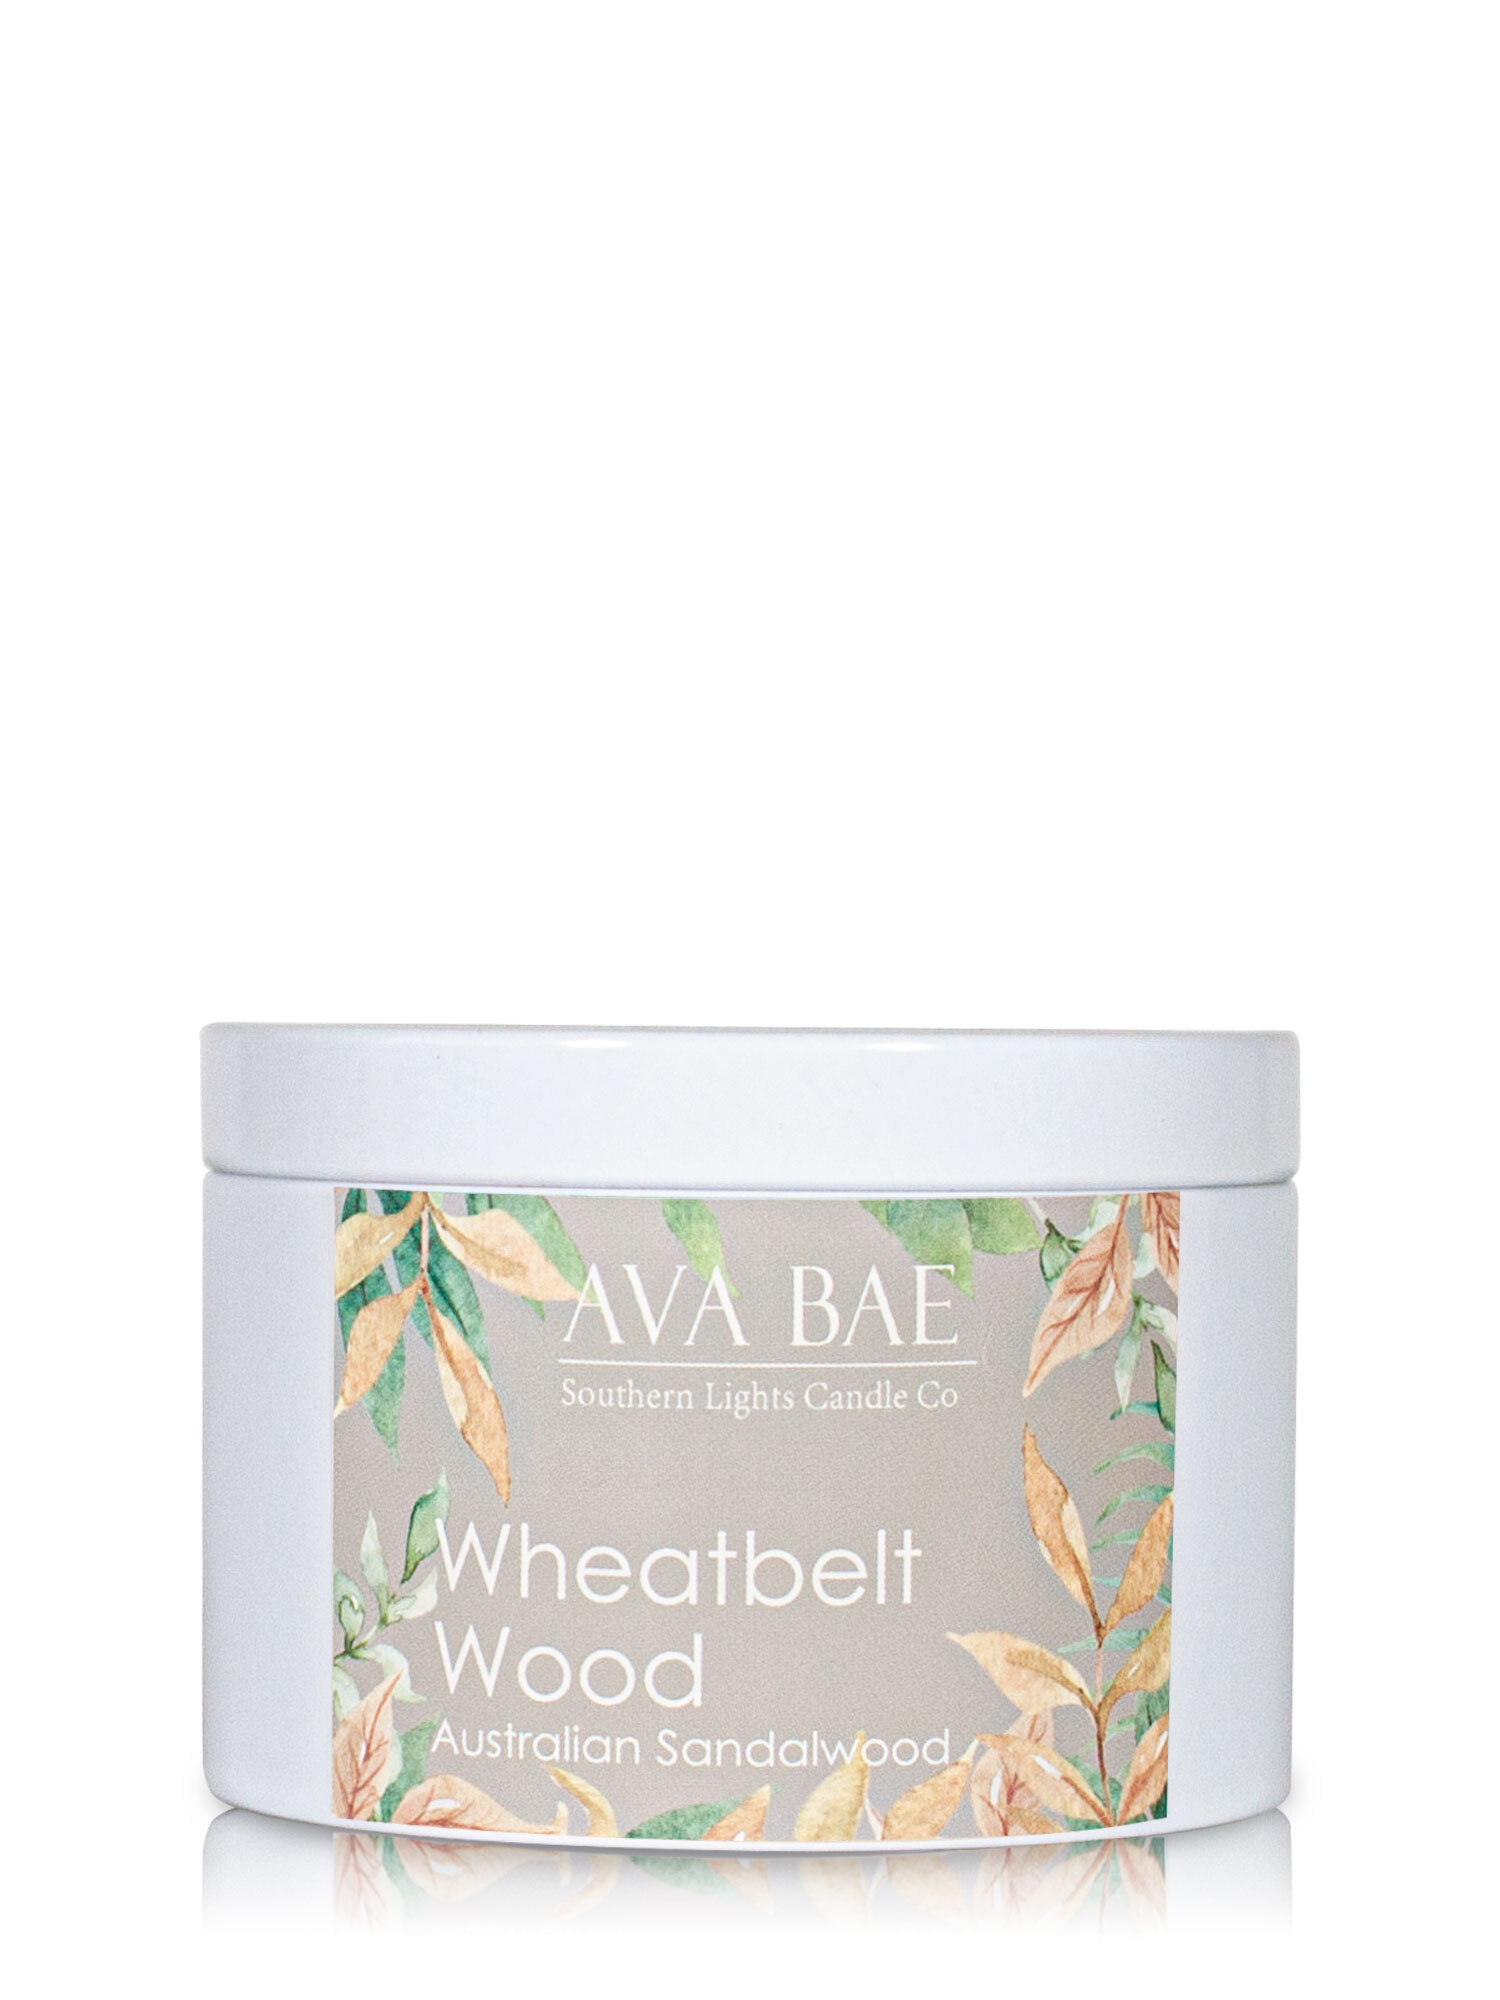  Wheatbelt Wood 200g Scented Soy Travel Tin